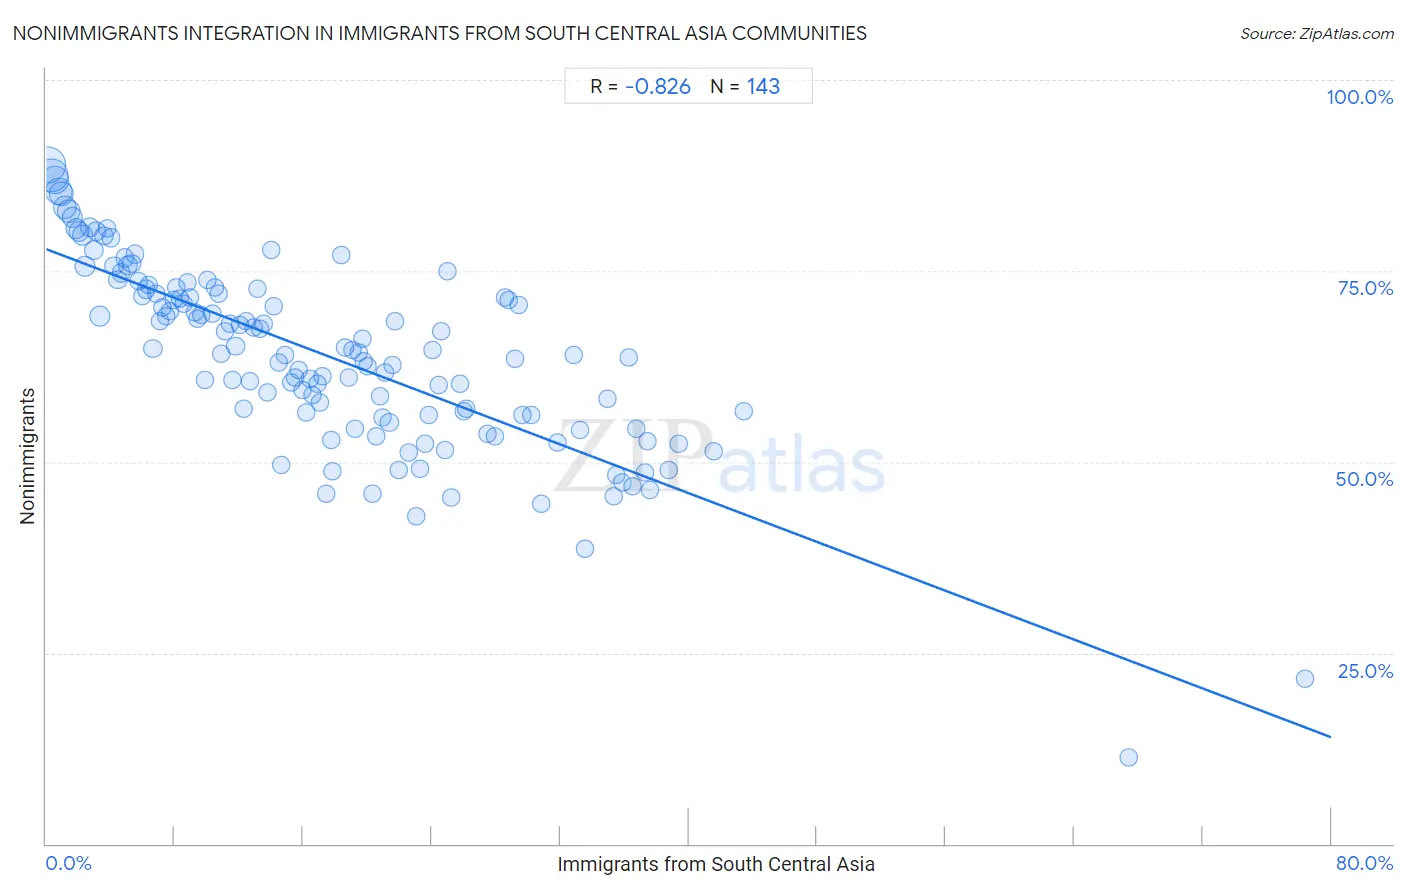 Immigrants from South Central Asia Integration in Nonimmigrants Communities